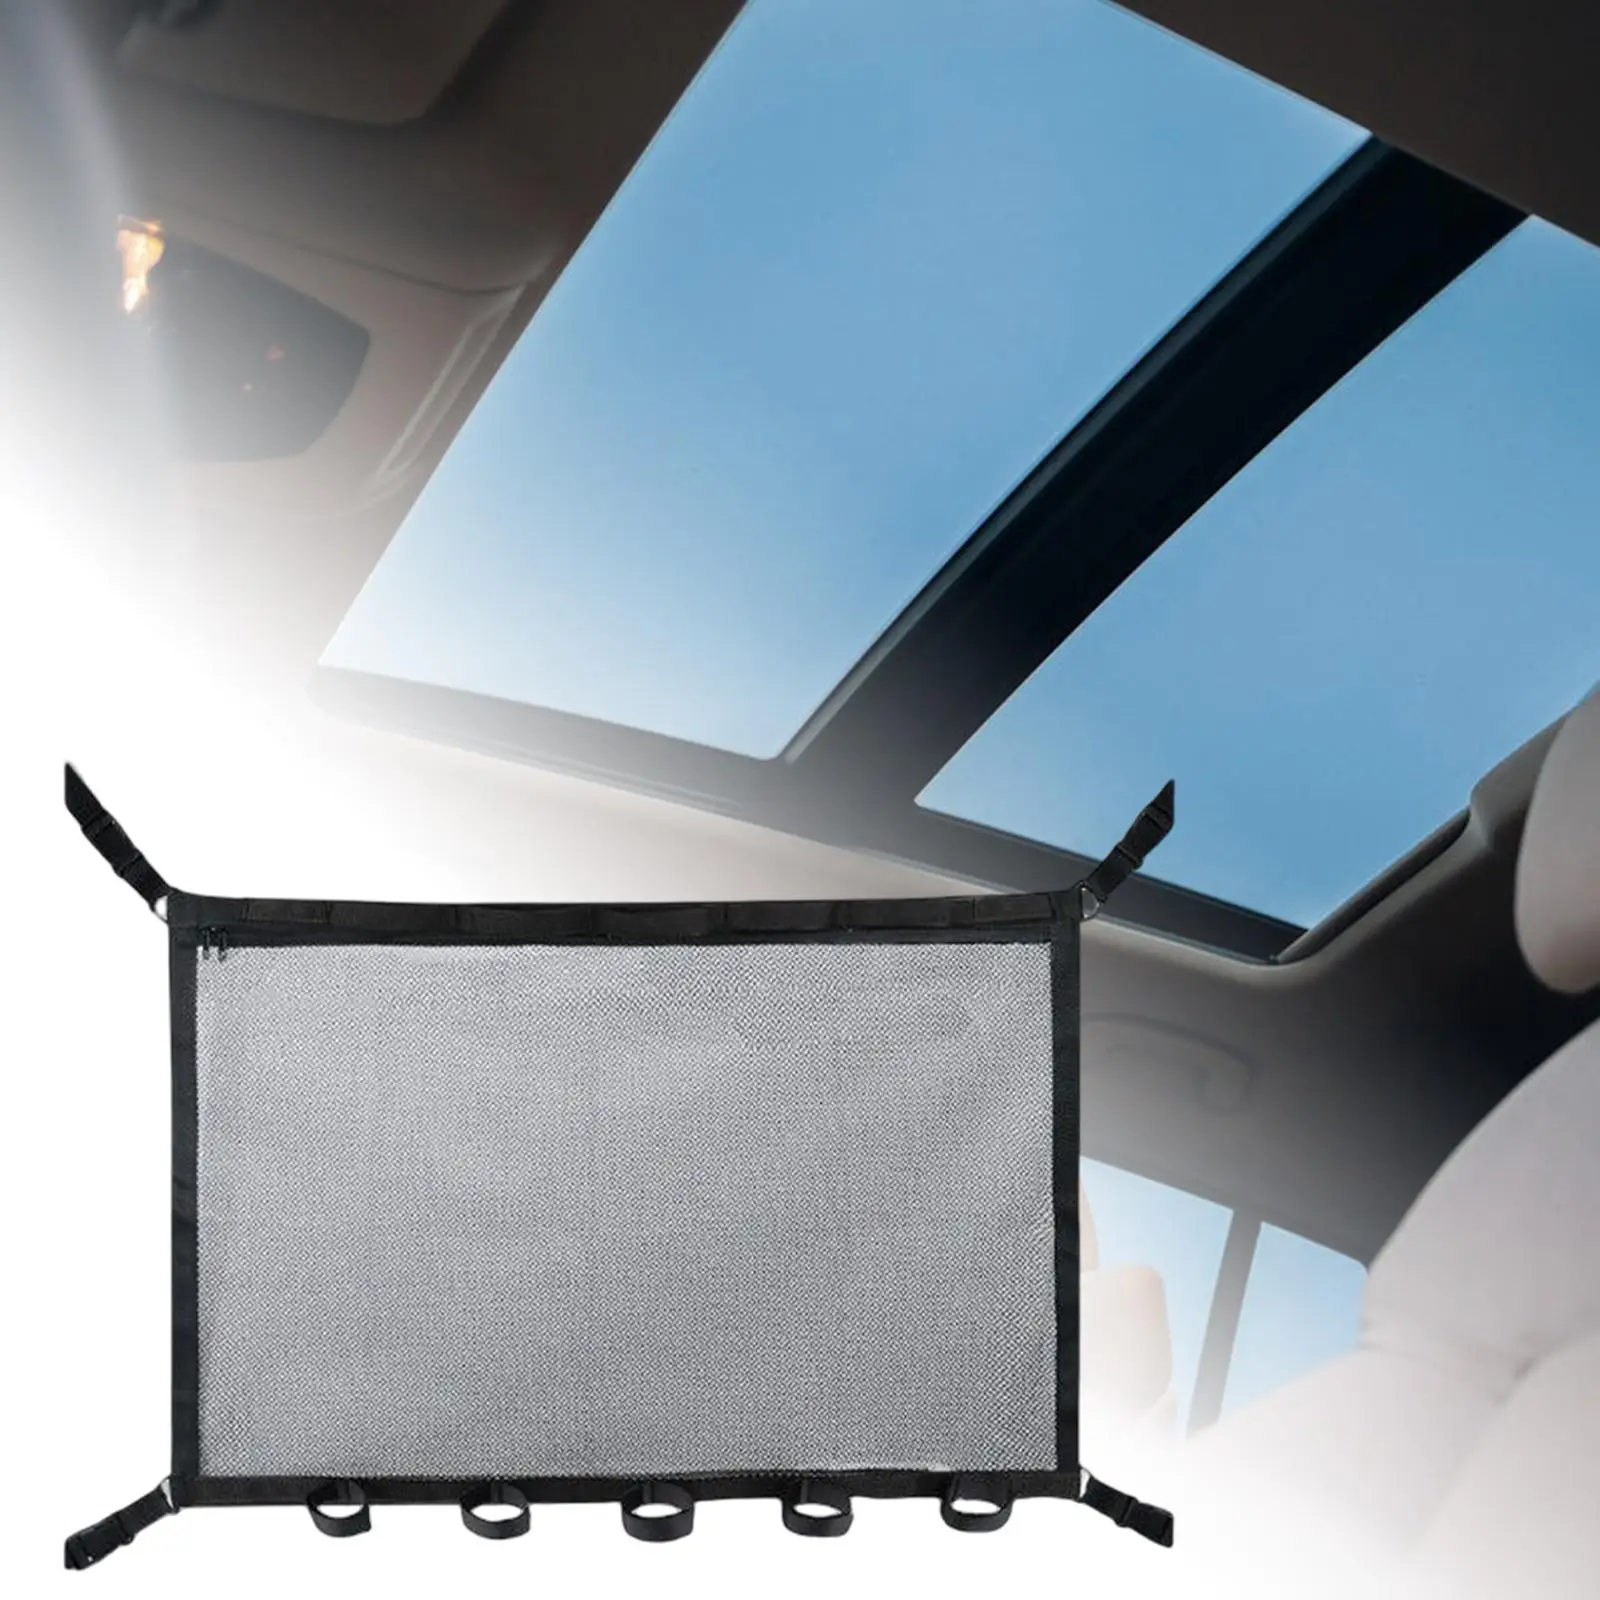 Portable Car Ceiling Storage Net Rod Holder Adjustable Double Layer Mesh Car Roof Organizer for Truck Travel Tent Blanket Toys